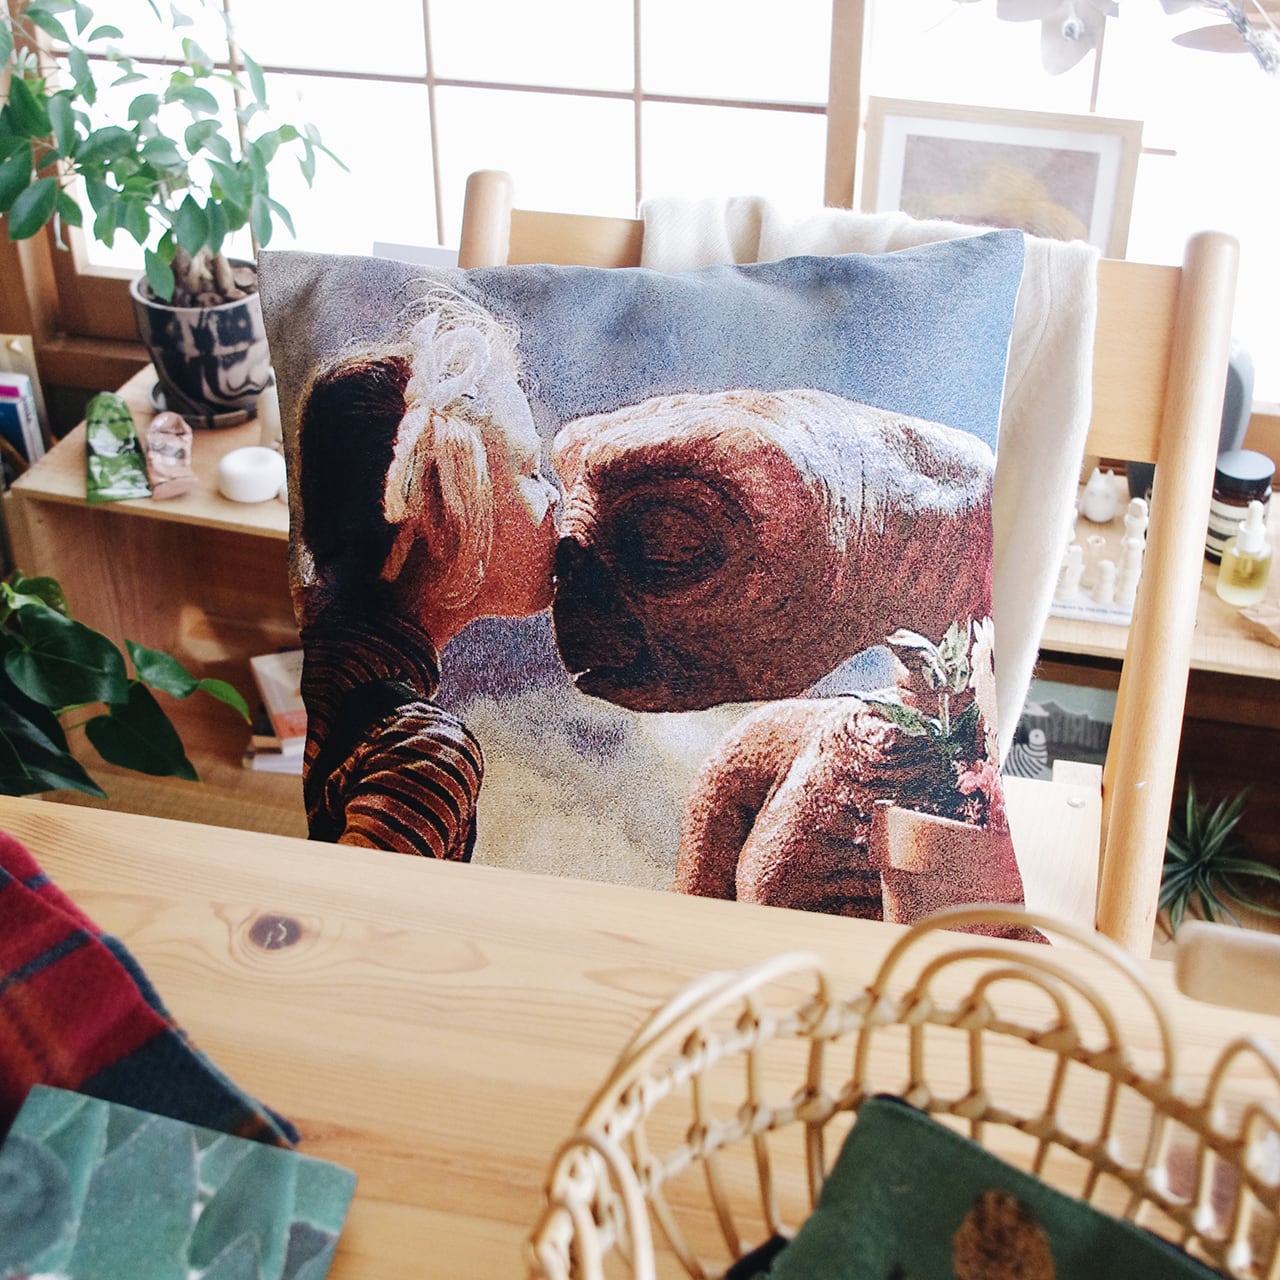 E.T. Cushion cover Gertie says "Be good"